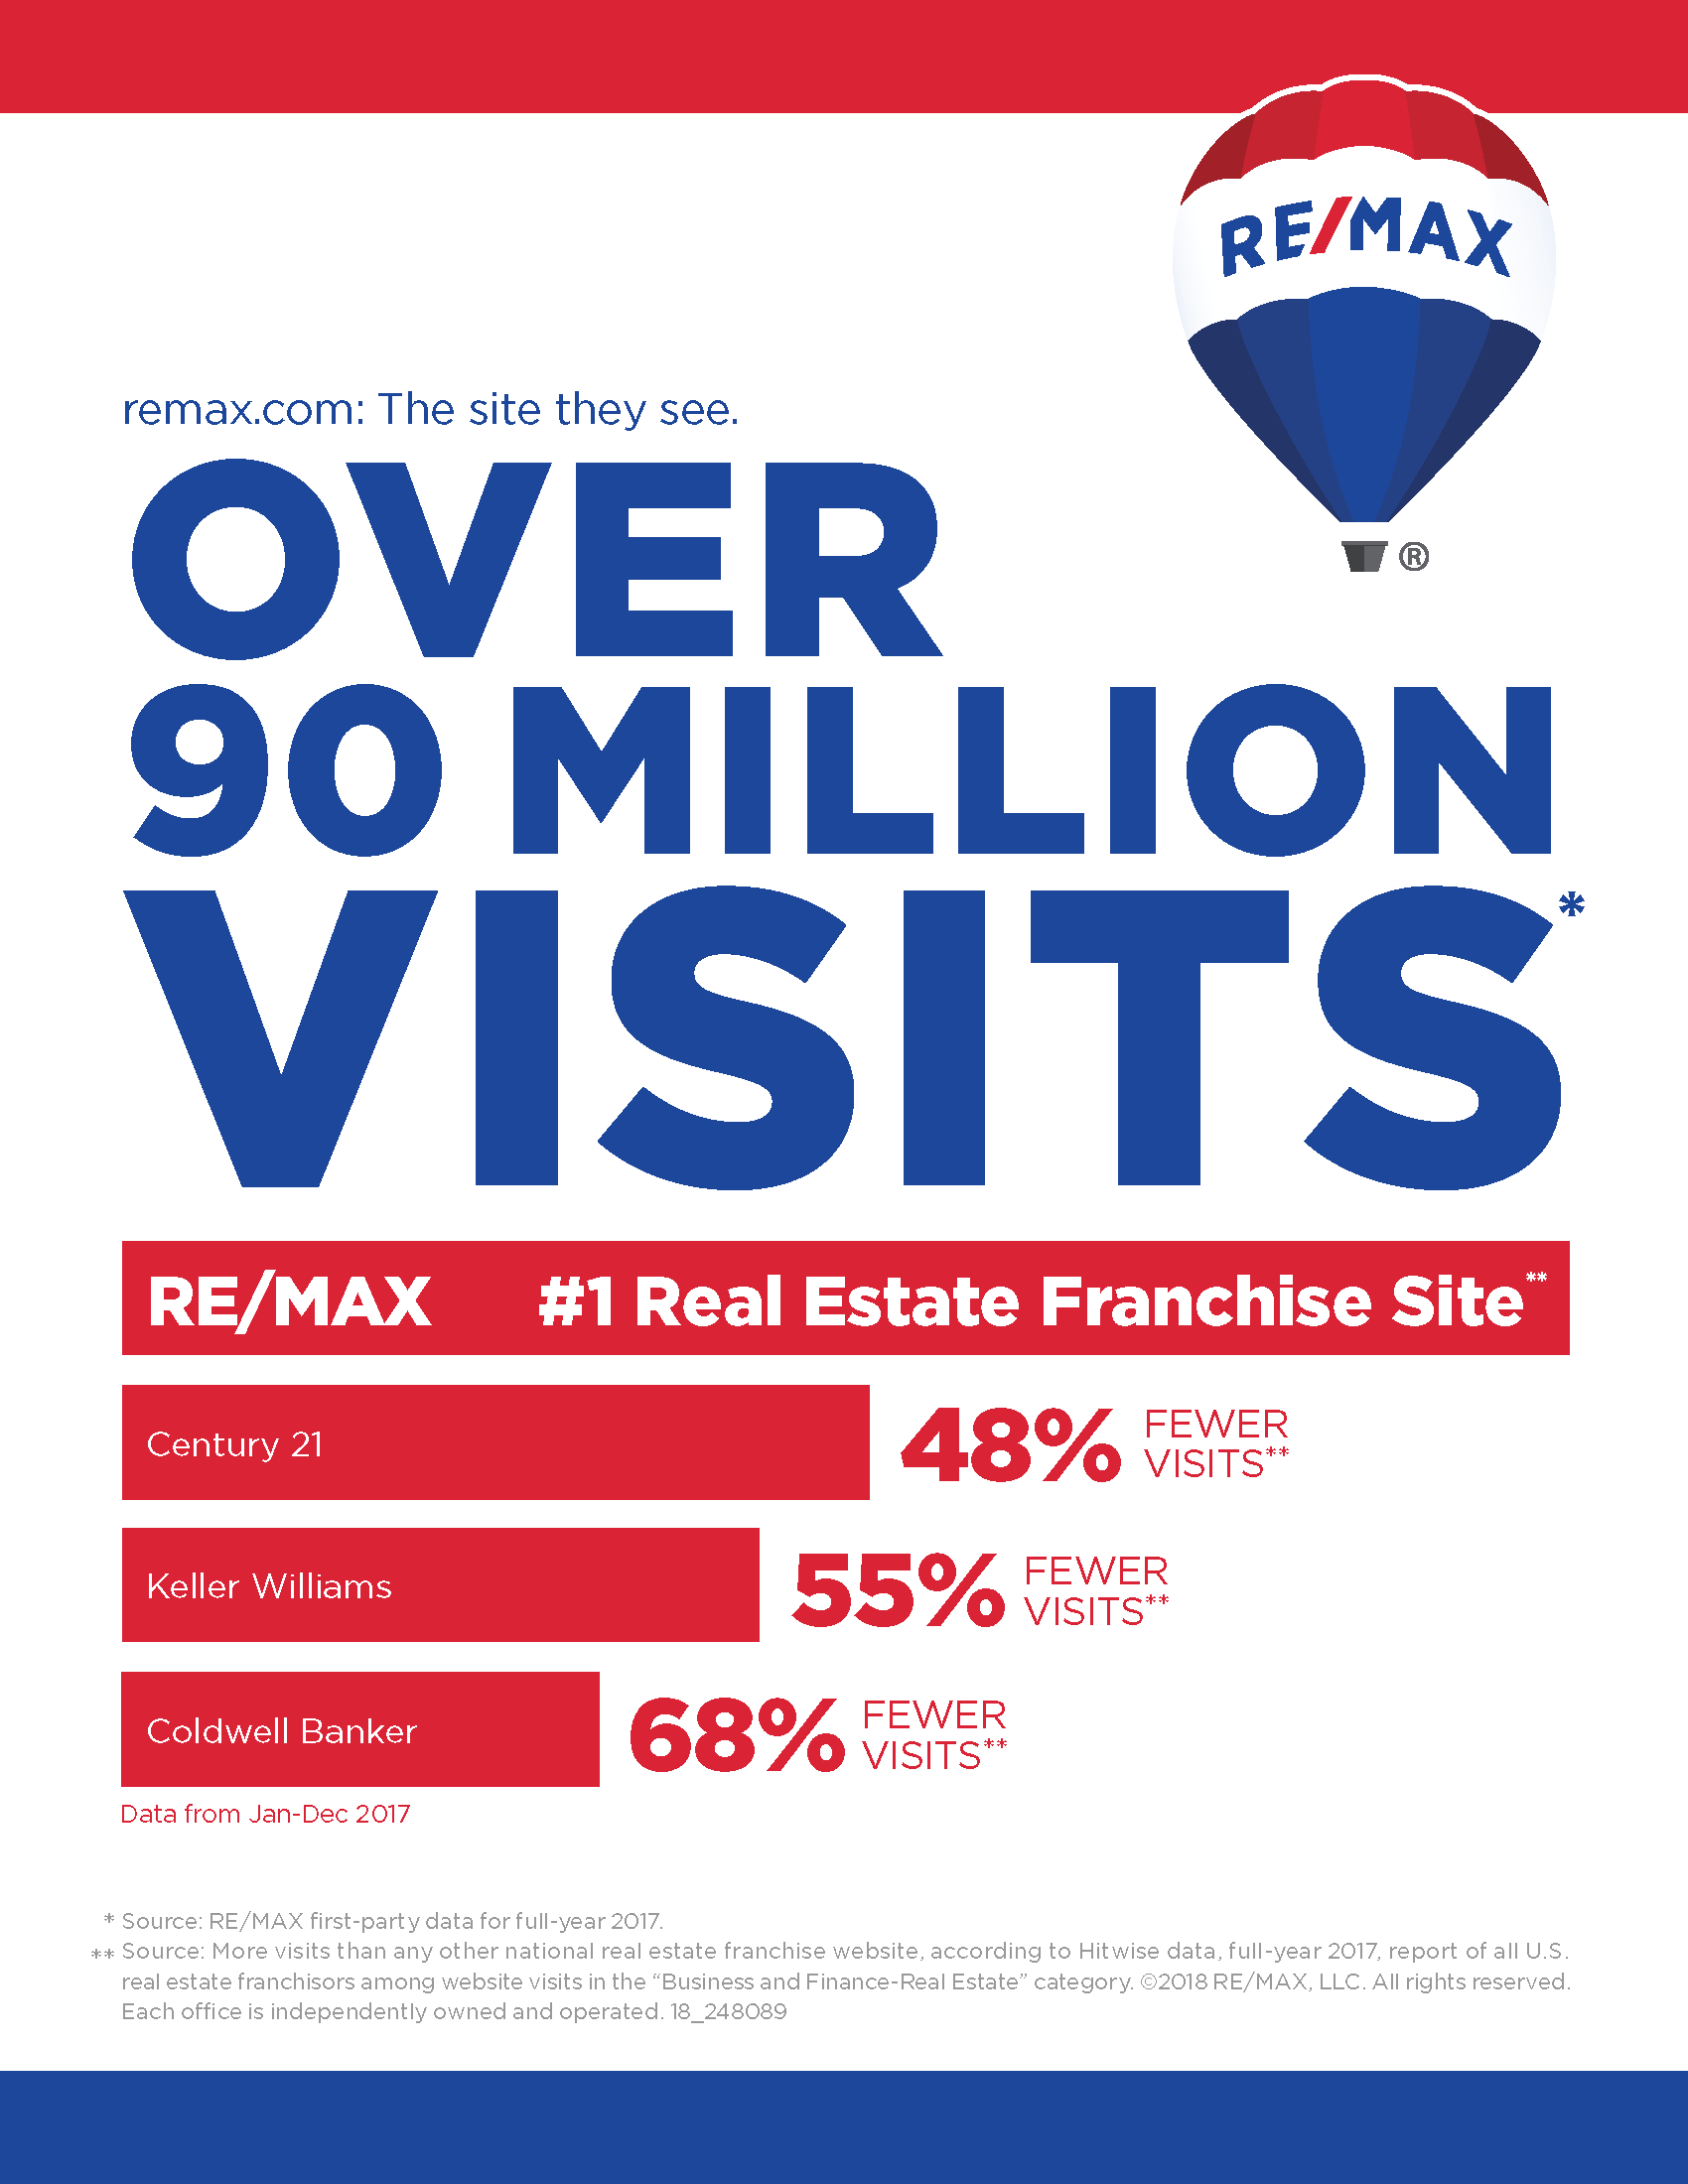 Remax.com Logo - Remax.com is the No. 1 real estate franchise website by visits